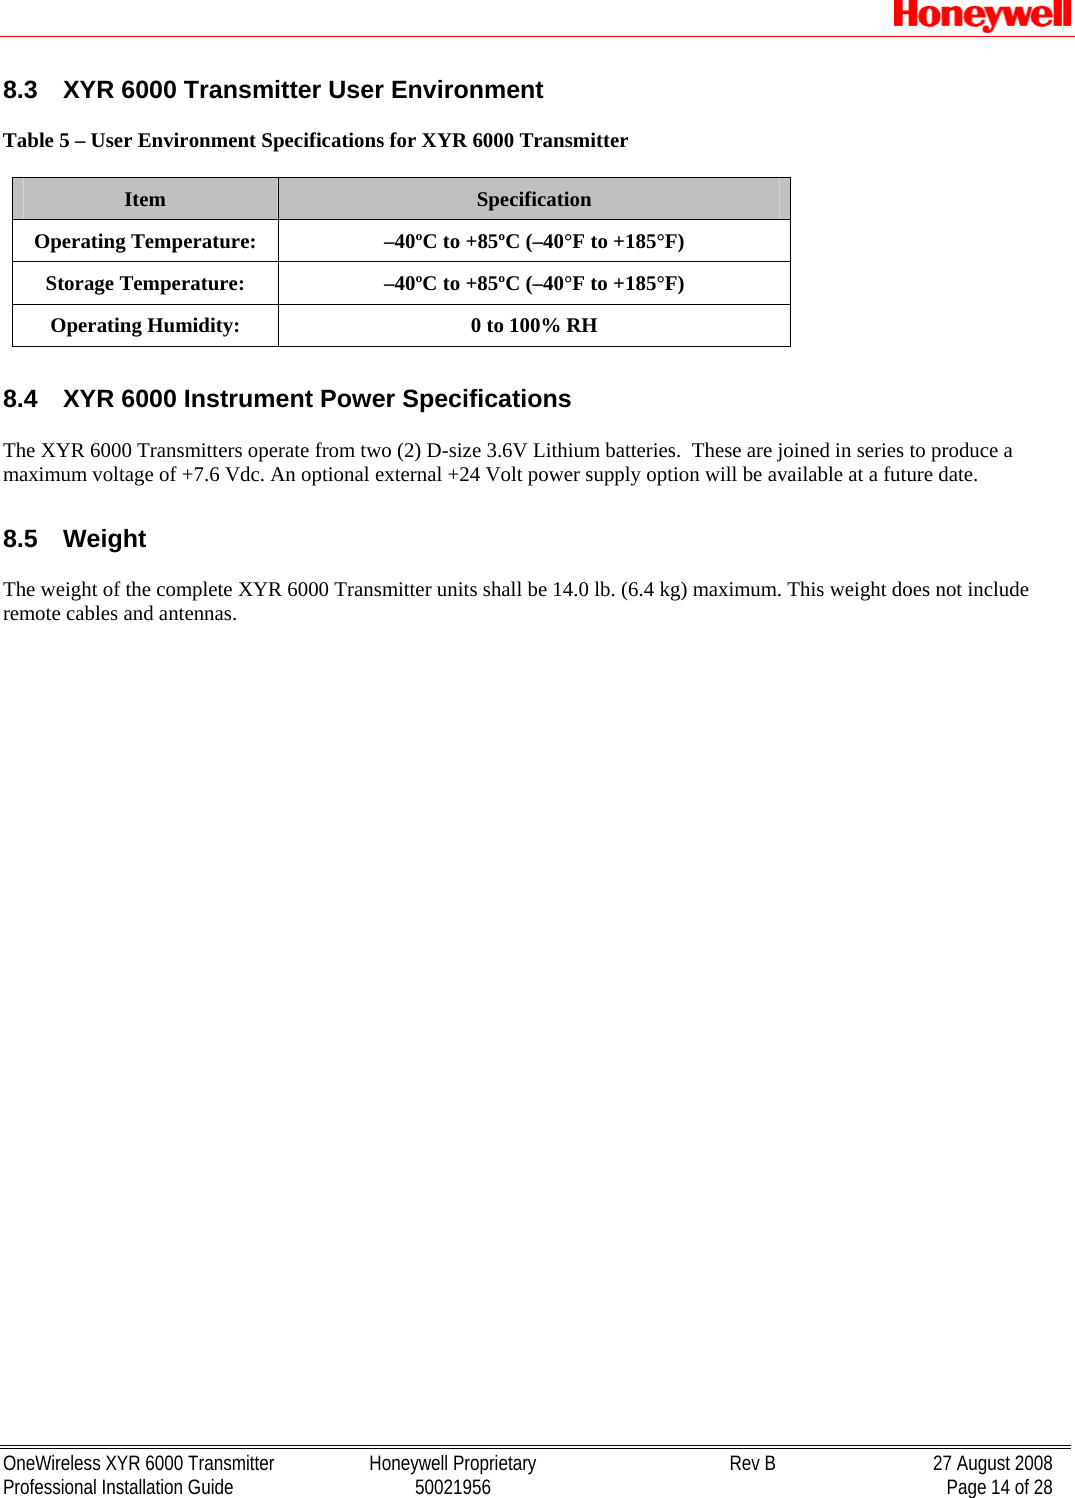   OneWireless XYR 6000 Transmitter  Honeywell Proprietary  Rev B  27 August 2008 Professional Installation Guide  50021956    Page 14 of 28 8.3  XYR 6000 Transmitter User Environment  Table 5 – User Environment Specifications for XYR 6000 Transmitter  Item  Specification Operating Temperature:  –40ºC to +85ºC (–40°F to +185°F) Storage Temperature:  –40ºC to +85ºC (–40°F to +185°F) Operating Humidity:  0 to 100% RH  8.4  XYR 6000 Instrument Power Specifications  The XYR 6000 Transmitters operate from two (2) D-size 3.6V Lithium batteries.  These are joined in series to produce a maximum voltage of +7.6 Vdc. An optional external +24 Volt power supply option will be available at a future date.  8.5  Weight   The weight of the complete XYR 6000 Transmitter units shall be 14.0 lb. (6.4 kg) maximum. This weight does not include remote cables and antennas.  